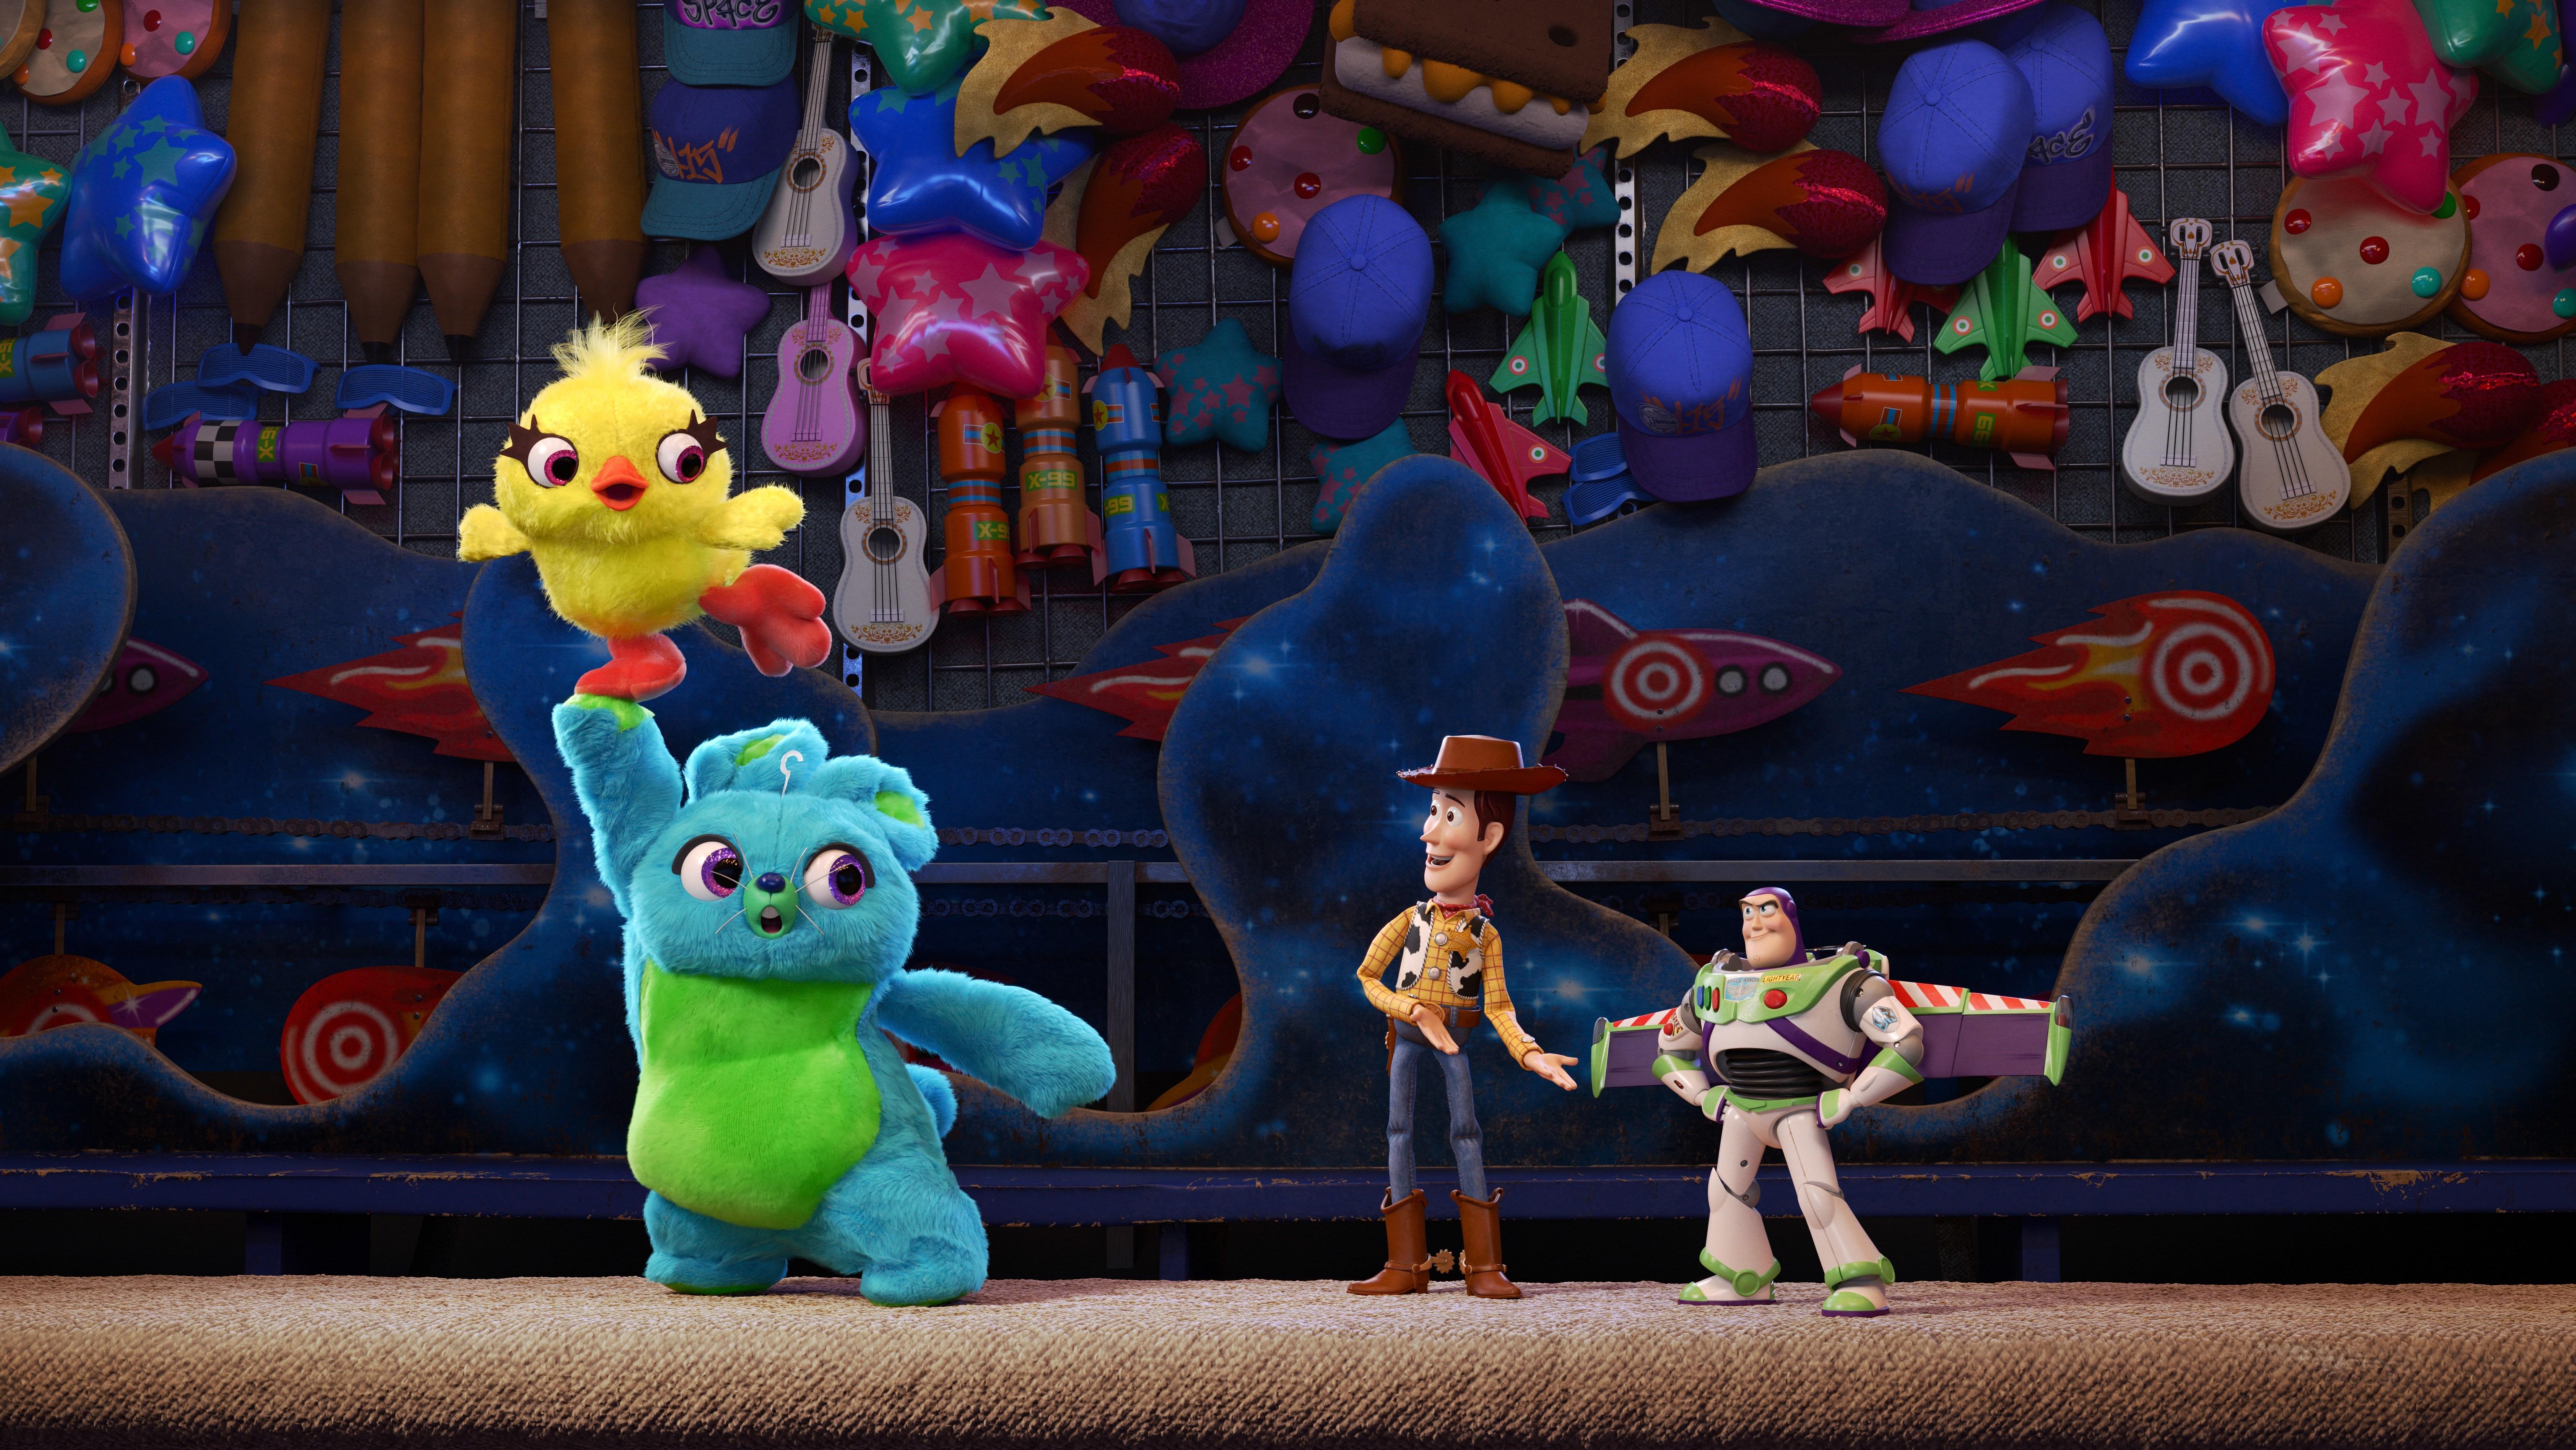 Toy Story 4 Image, HD Movies 4K Wallpaper, Image, Photo and Background